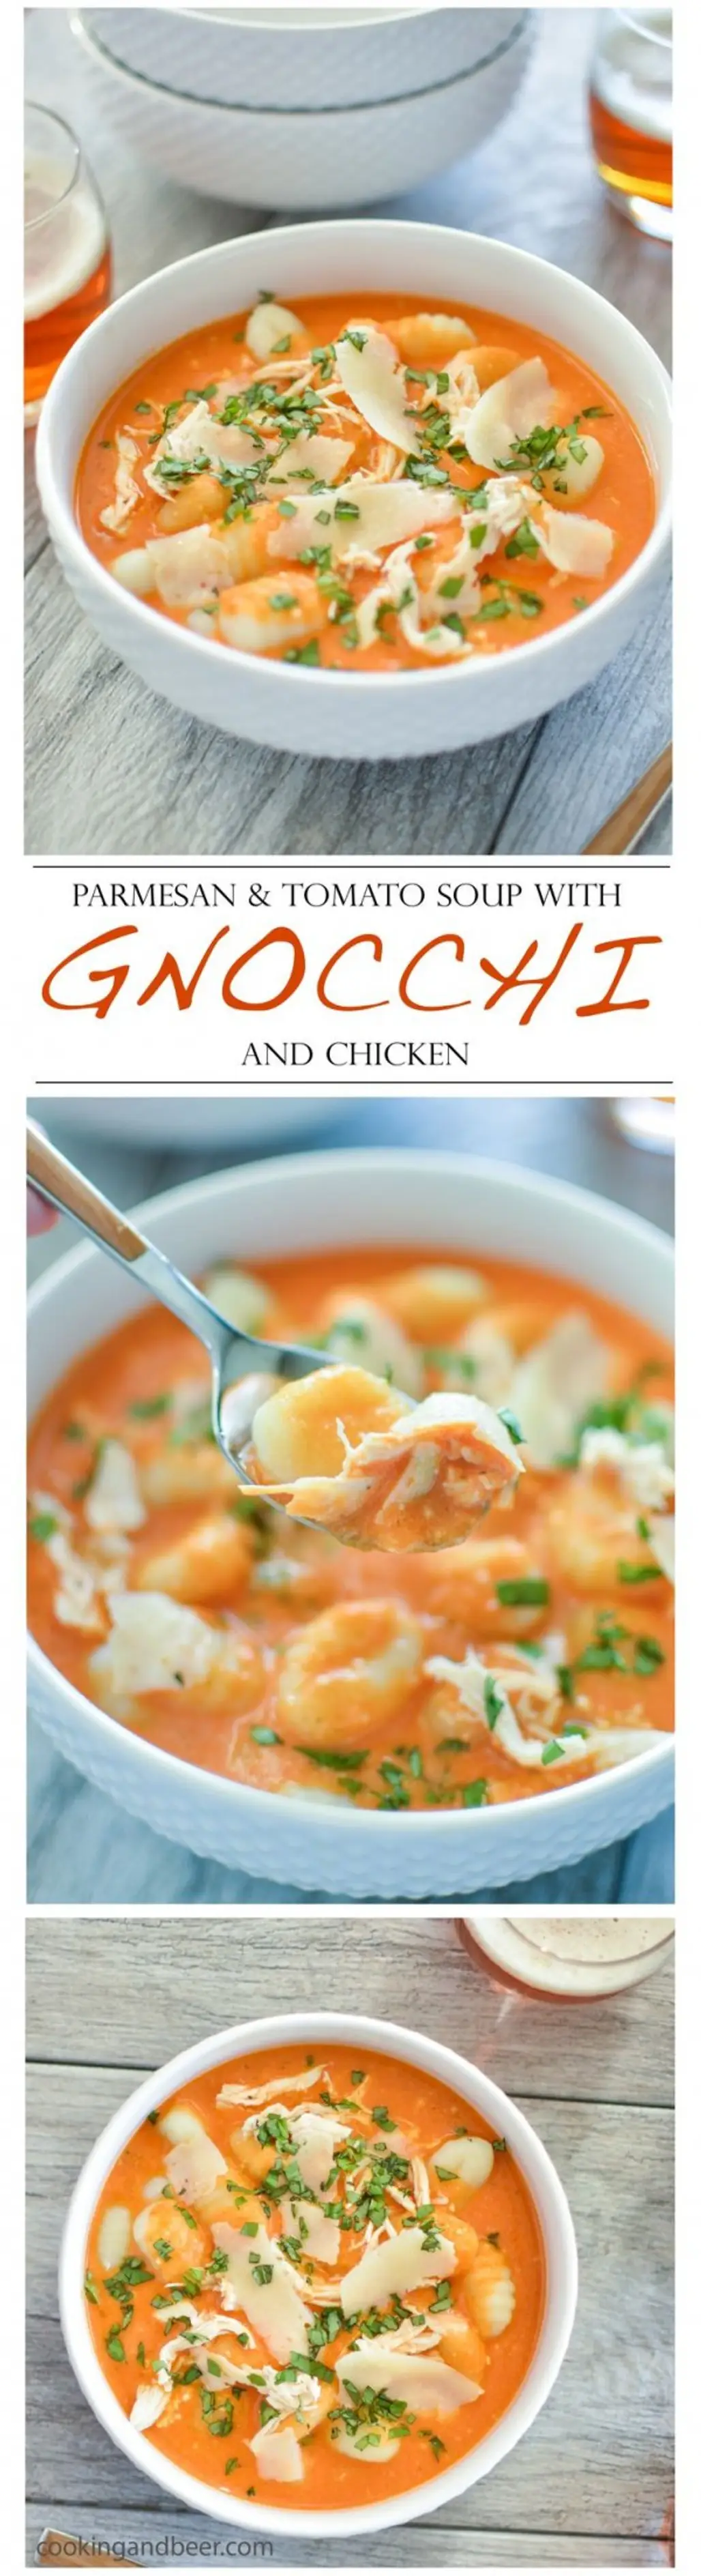 Slow Cooker Parmesan and Tomato Soup with Gnocchi and Chicken